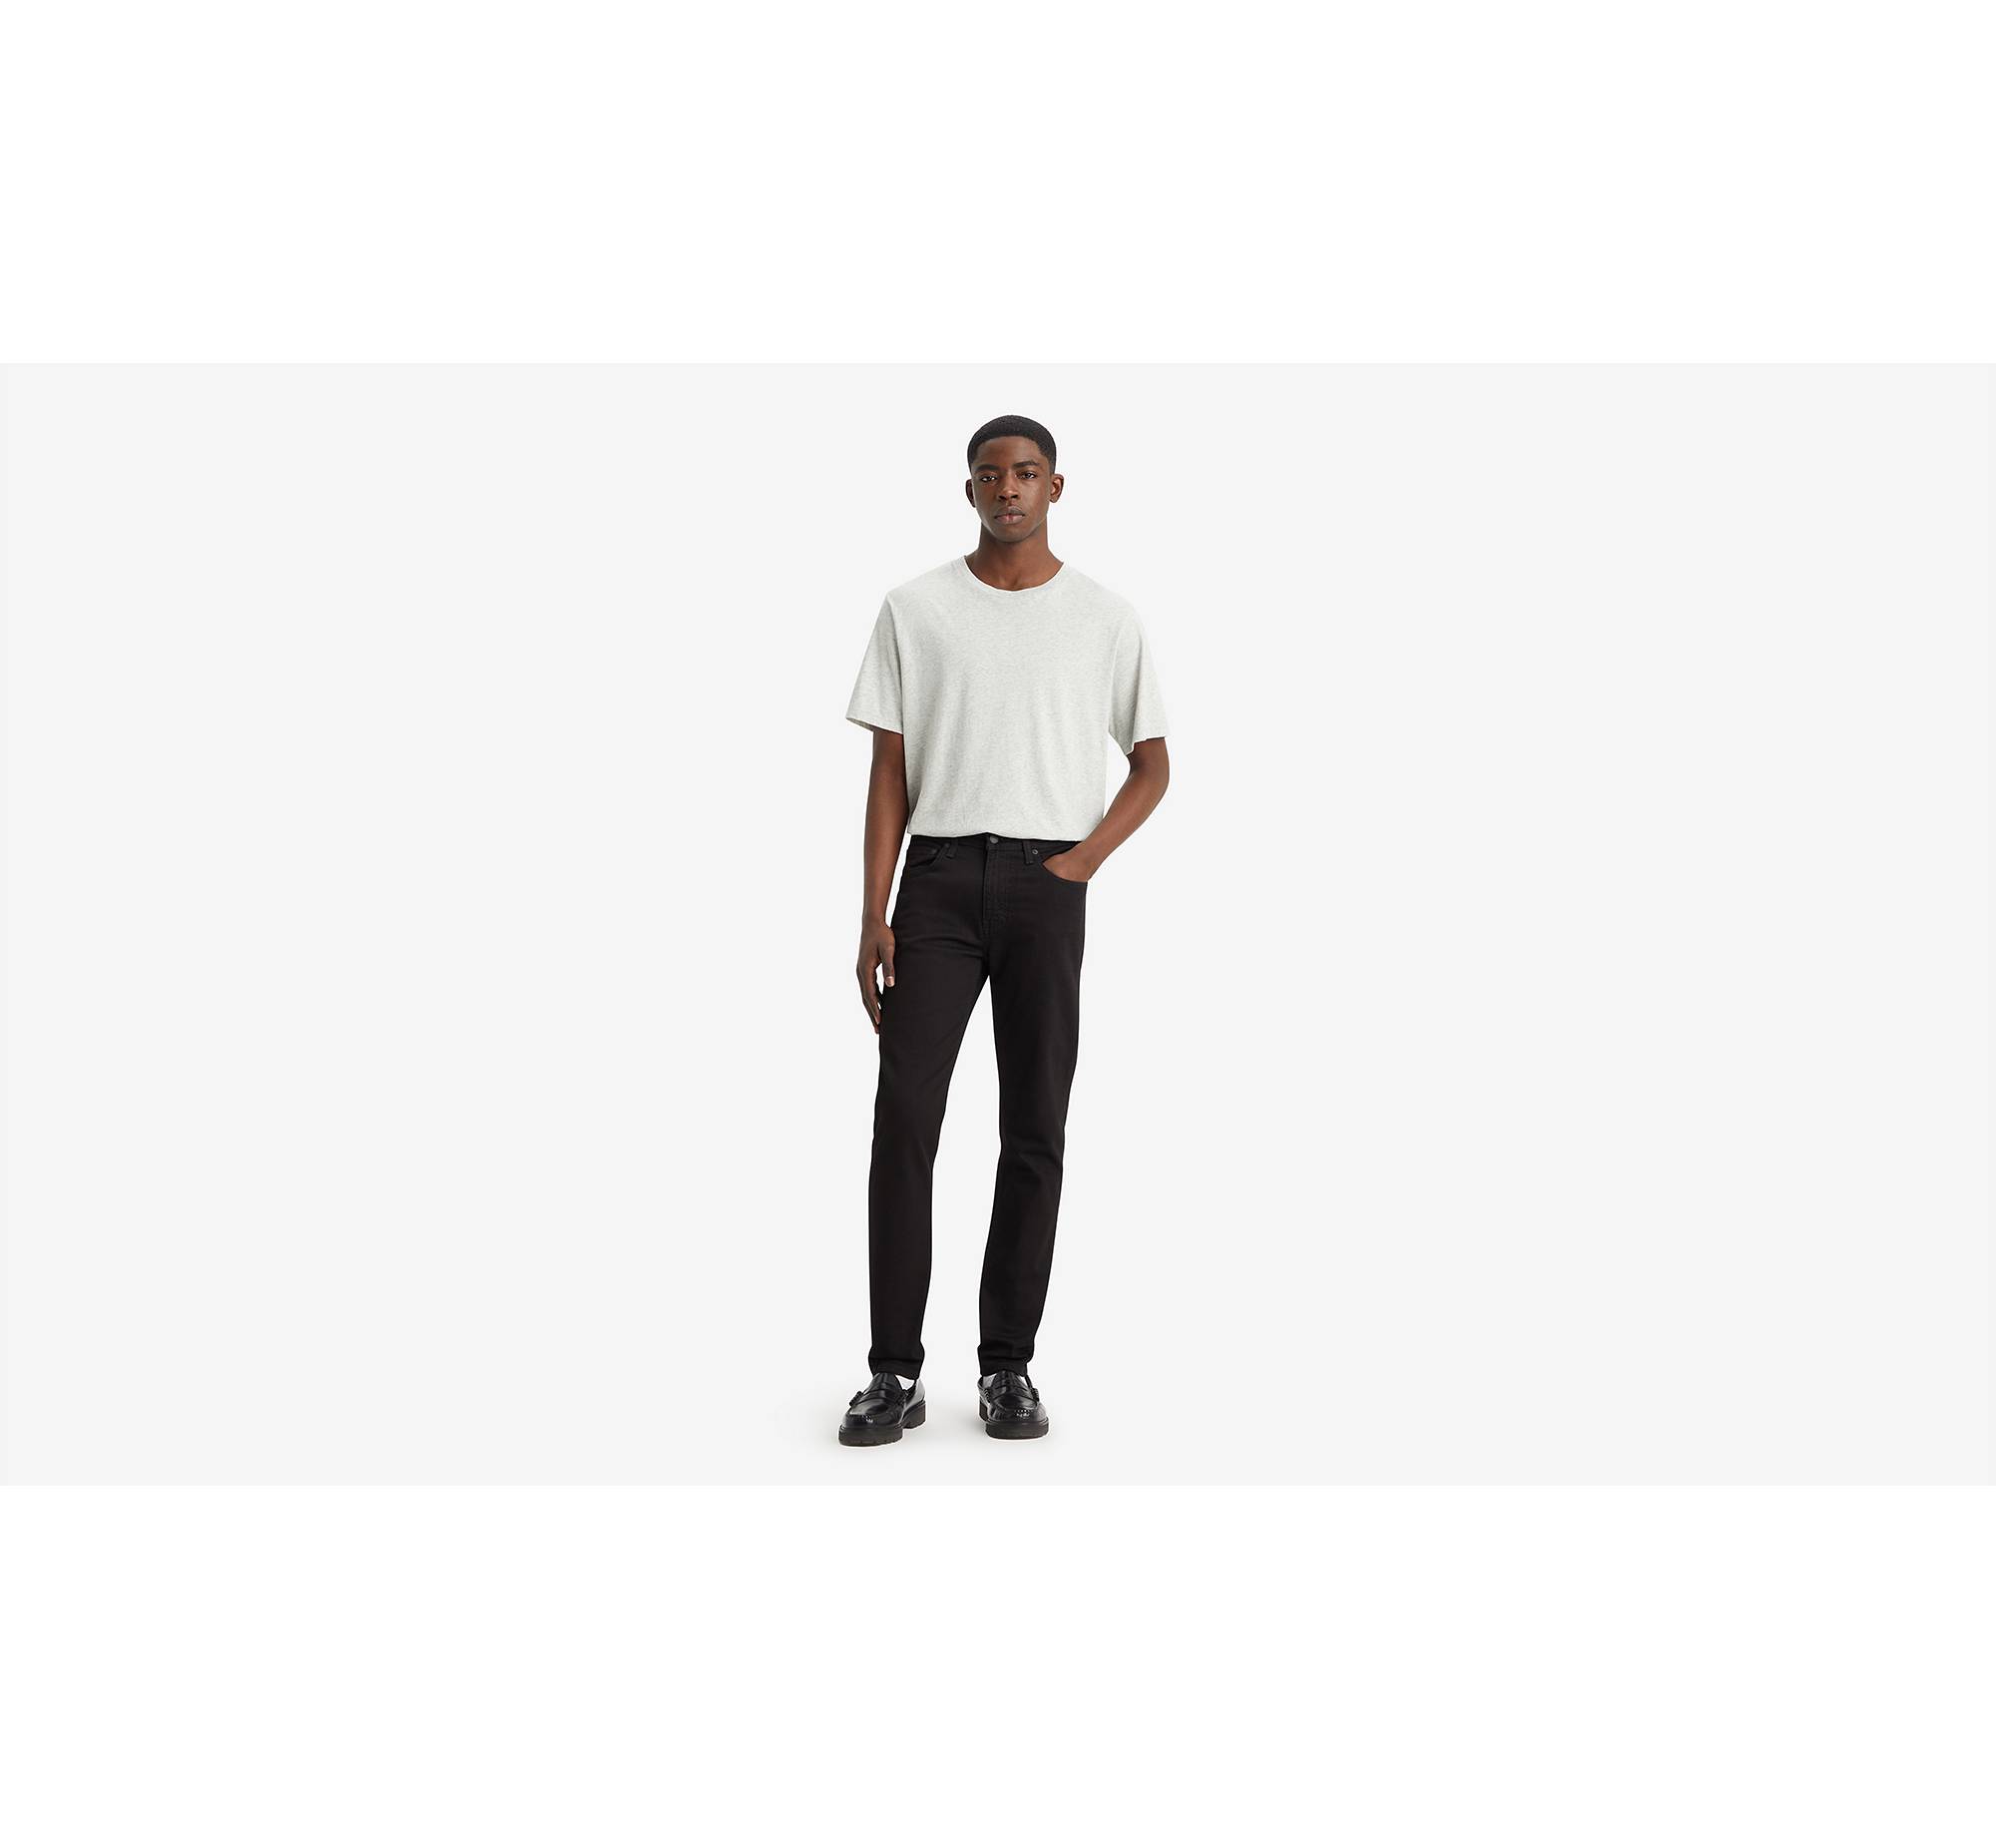 512™ Slim Tapered Lo-ball Jeans - Blue | Levi's® AD